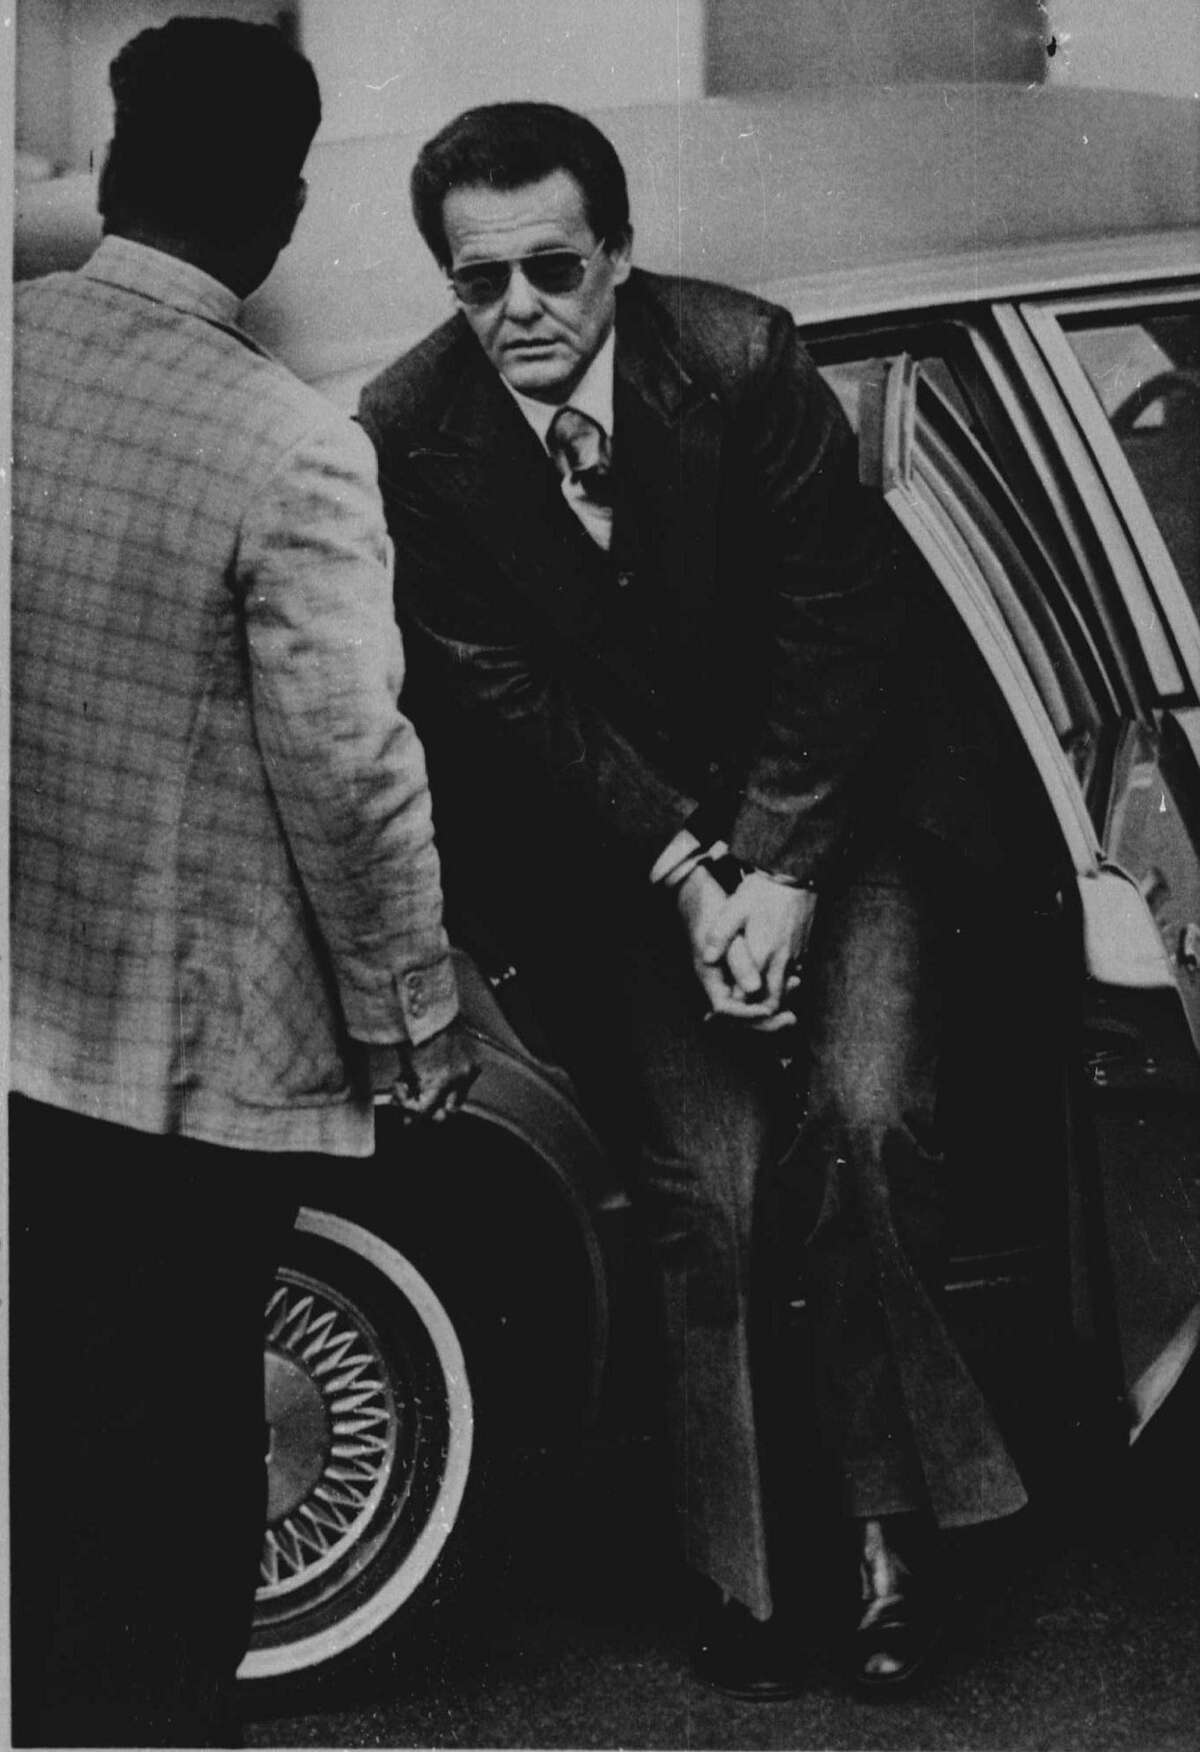 Charles Harrelson, arrives at the U.S. Courthouse in San Antonio, Texas, Tuesday morning, September 28, 1982, to begin the trial for the May 1979 murder of Federal Judge John H. Wood, Jr.( AP PHOTO/ STEVE KRAUSS)